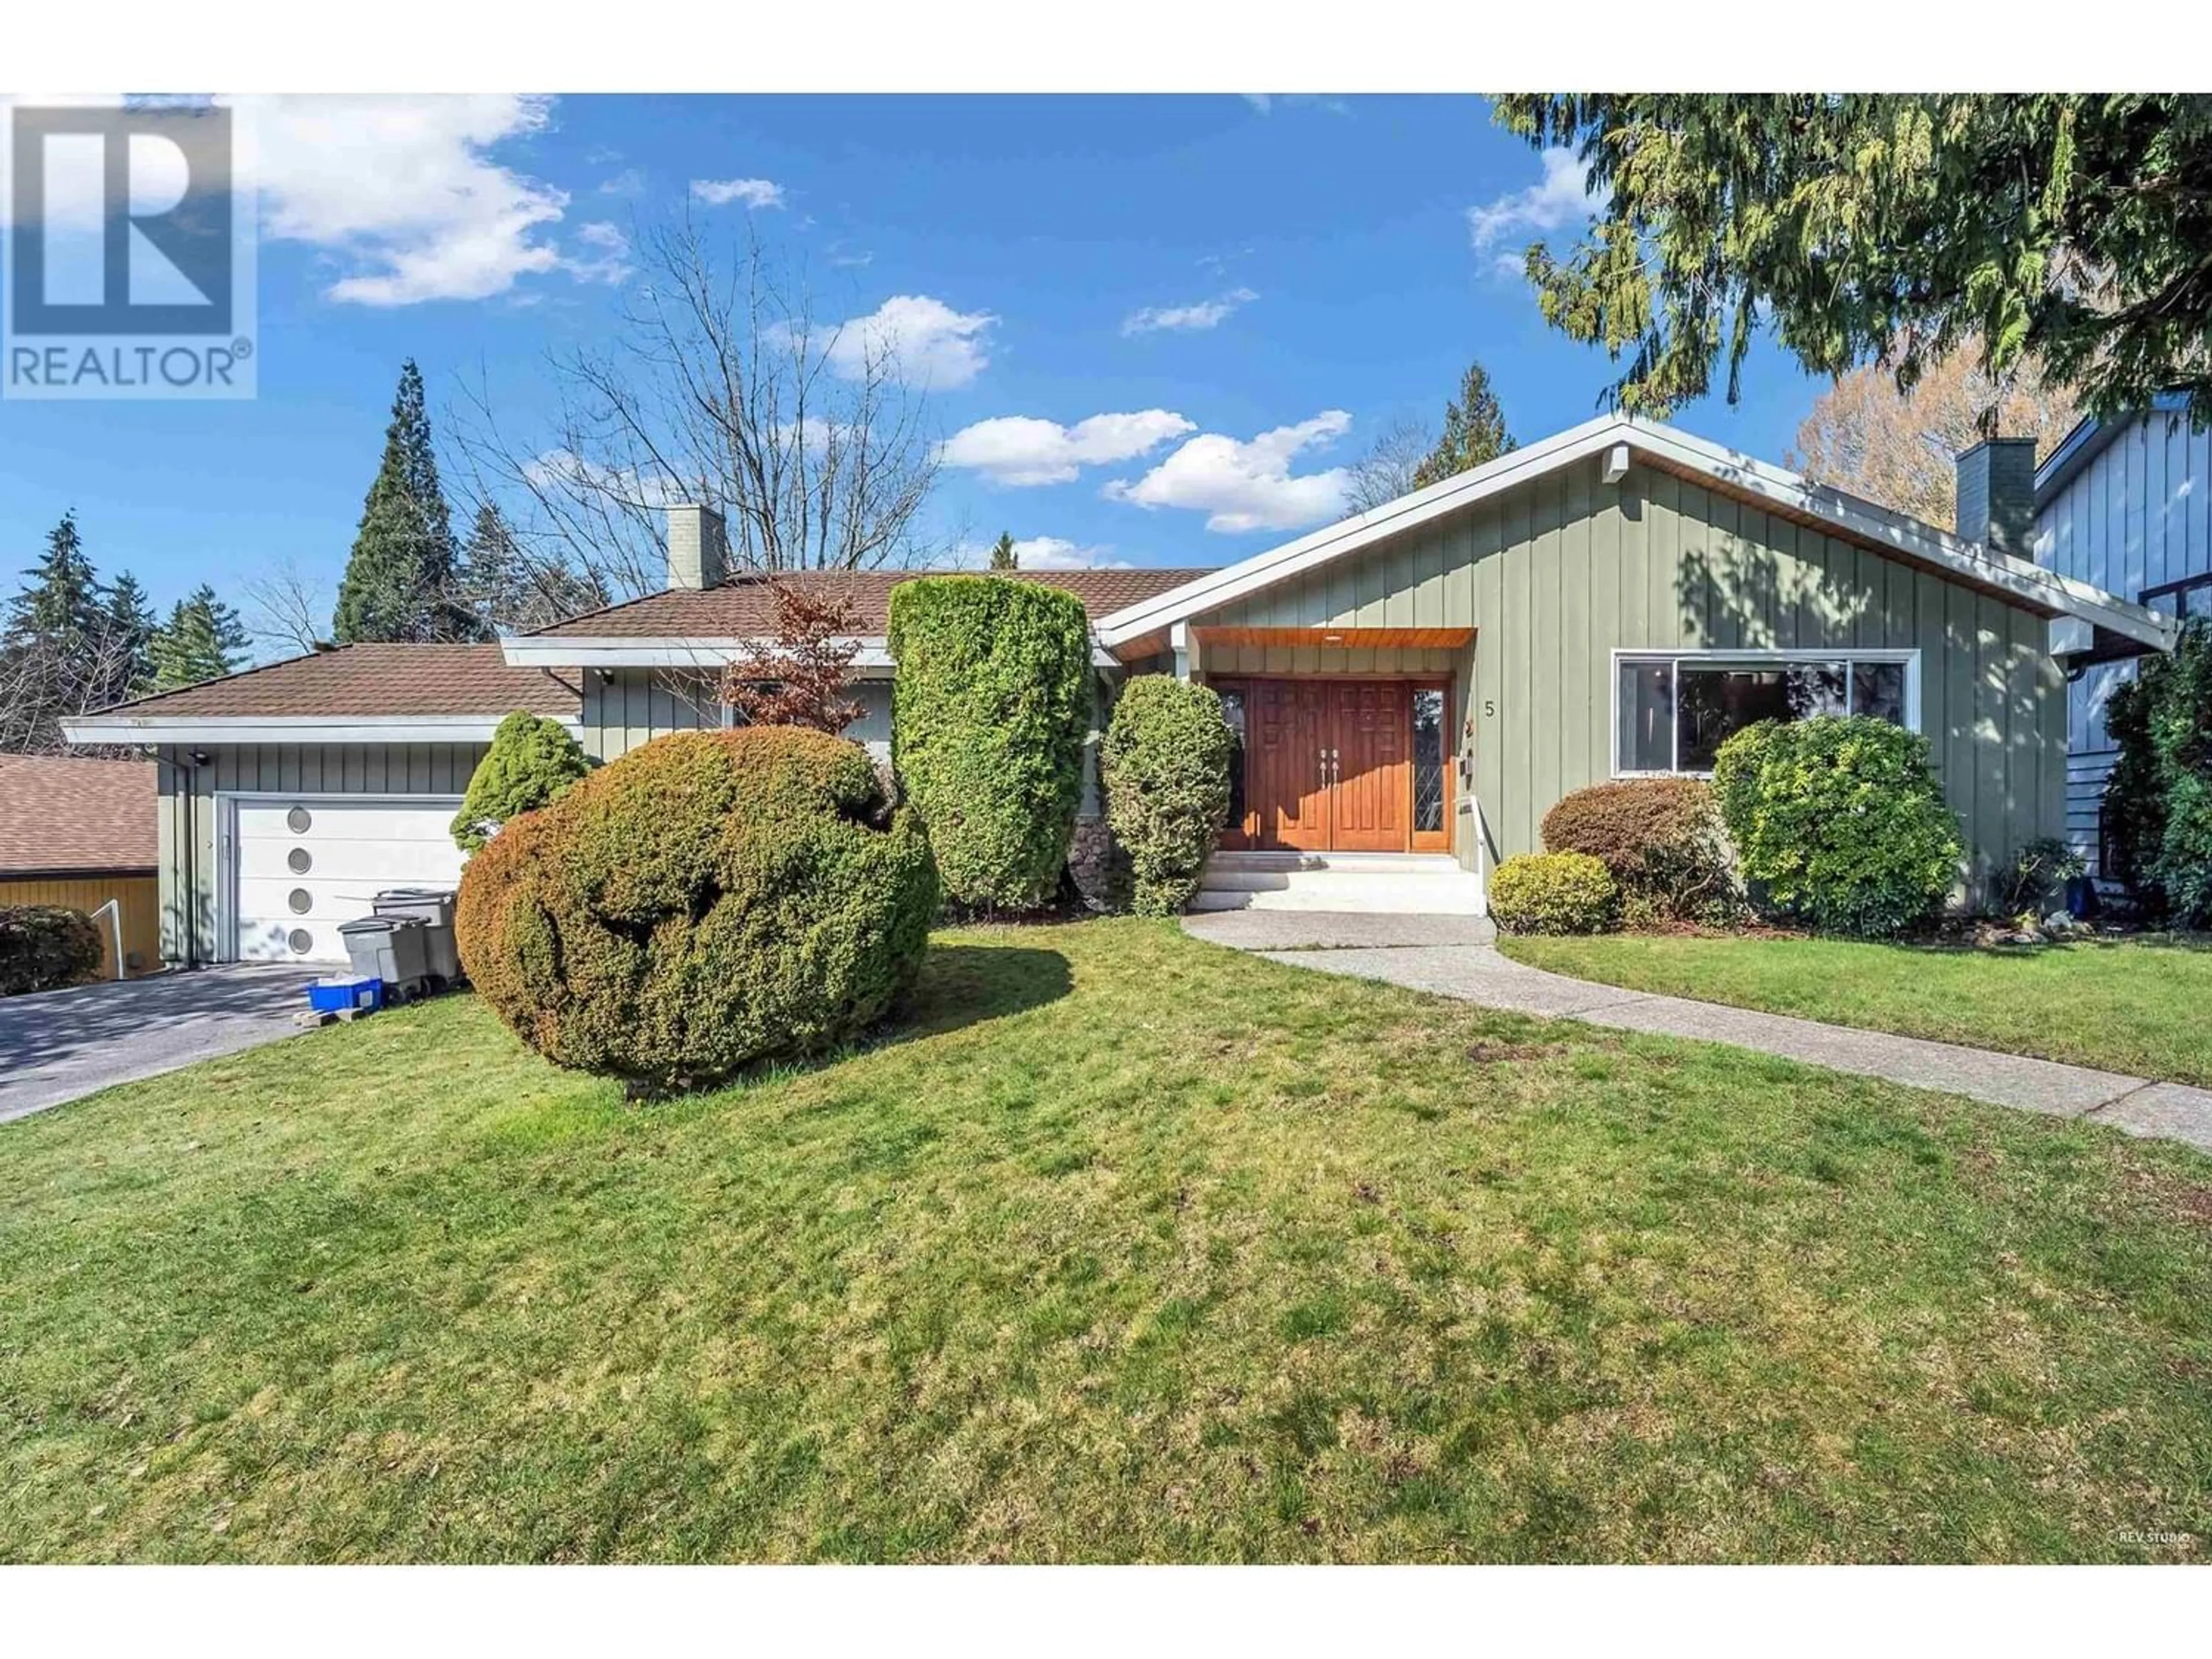 Frontside or backside of a home for 5 TAMATH CRESCENT, Vancouver British Columbia V6N2C8